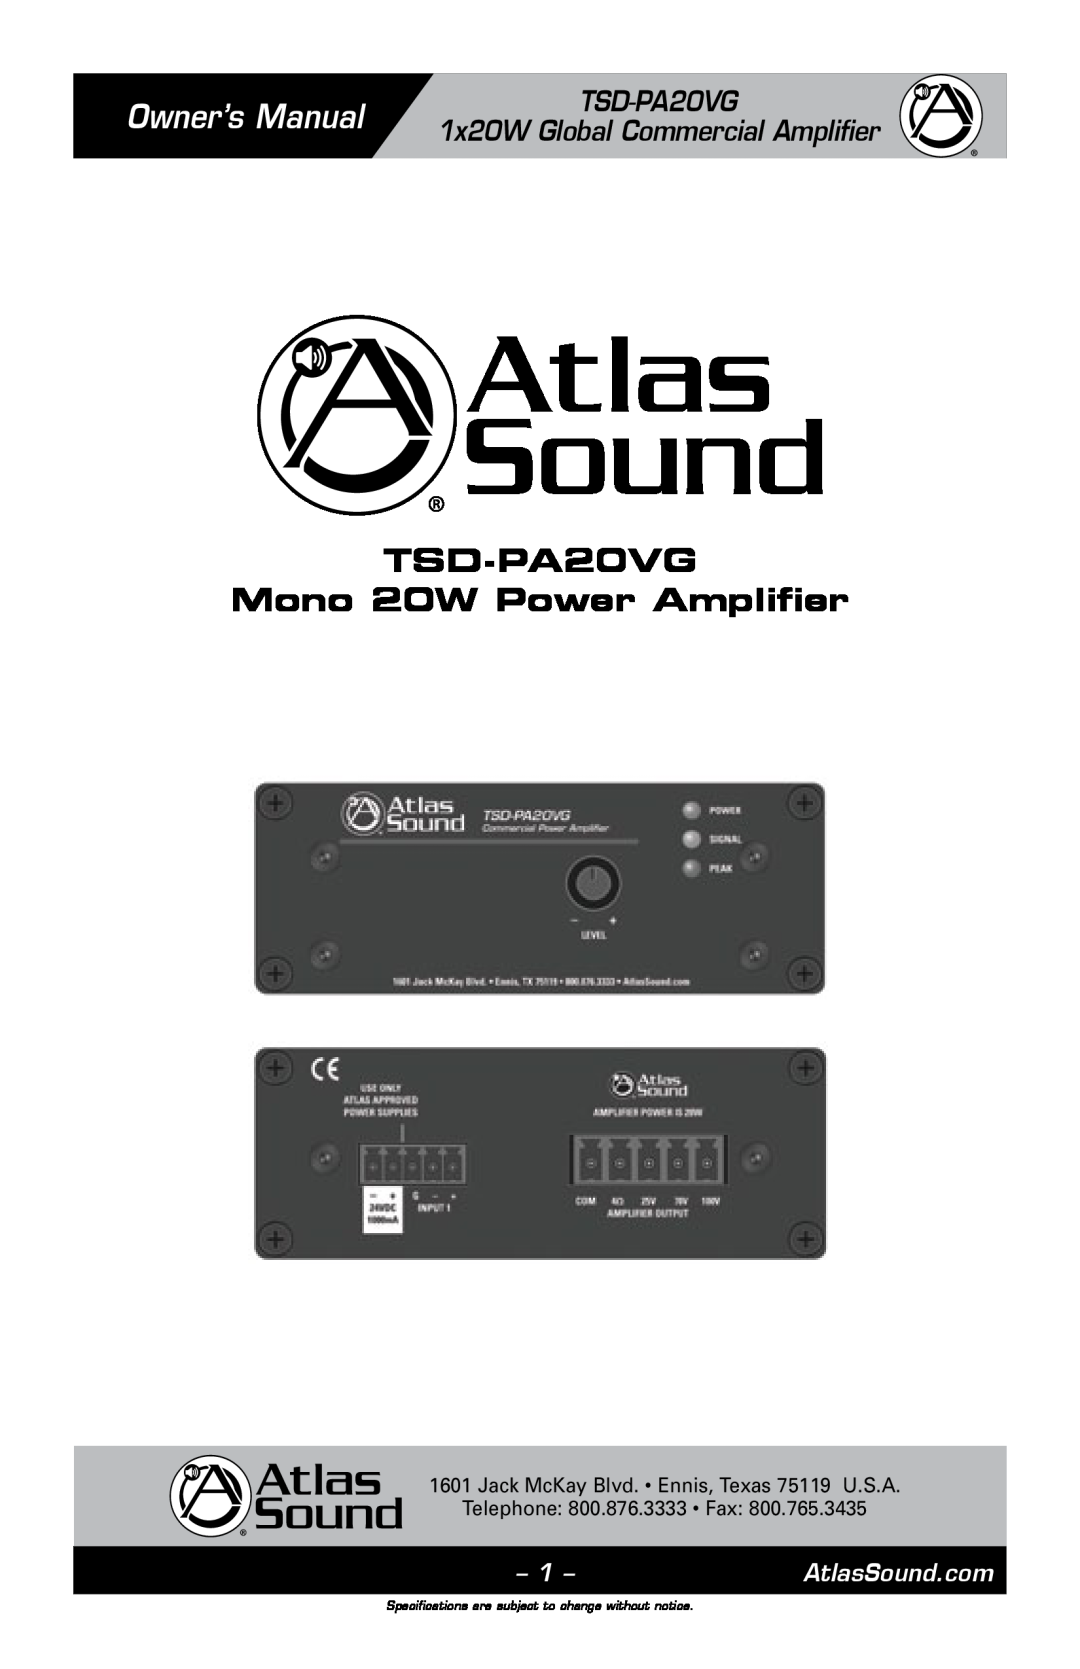 Atlas Sound owner manual Owner’s Manual, TSD-PA20VG 1x20W Global Commercial Amplifier, AtlasSound.com 